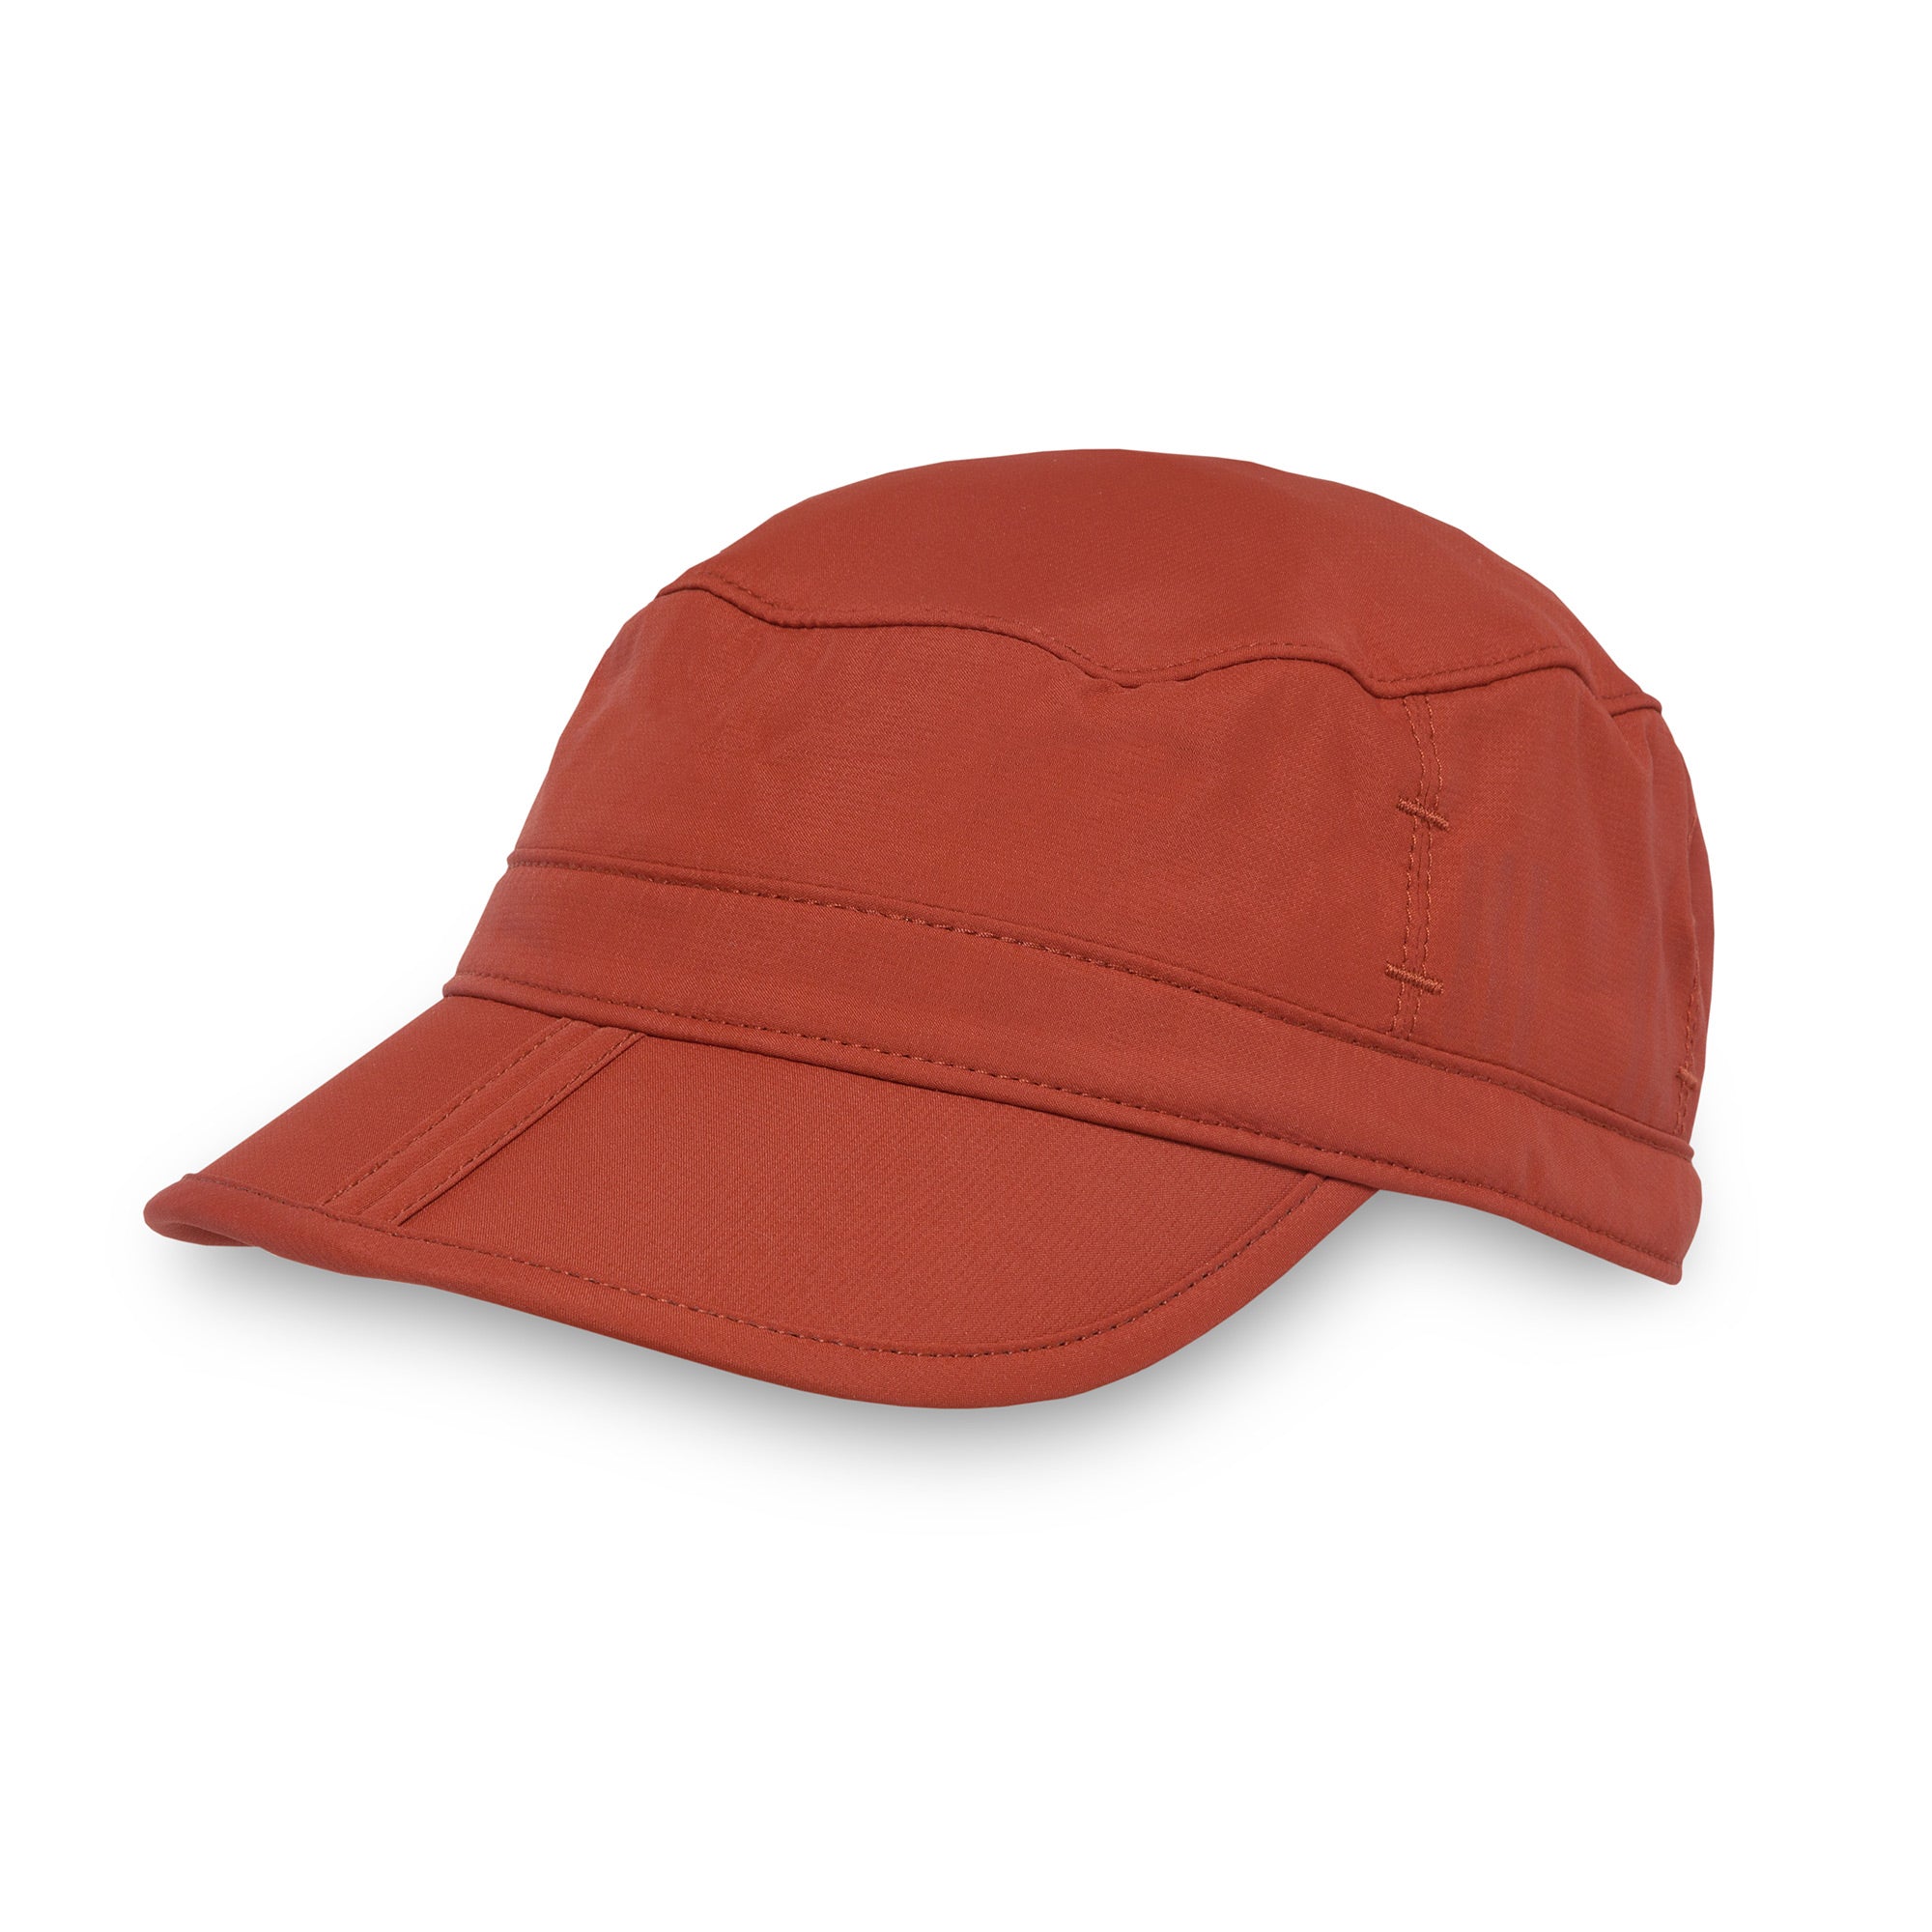 sunday afternoons sun tripper cap in mesa red slate